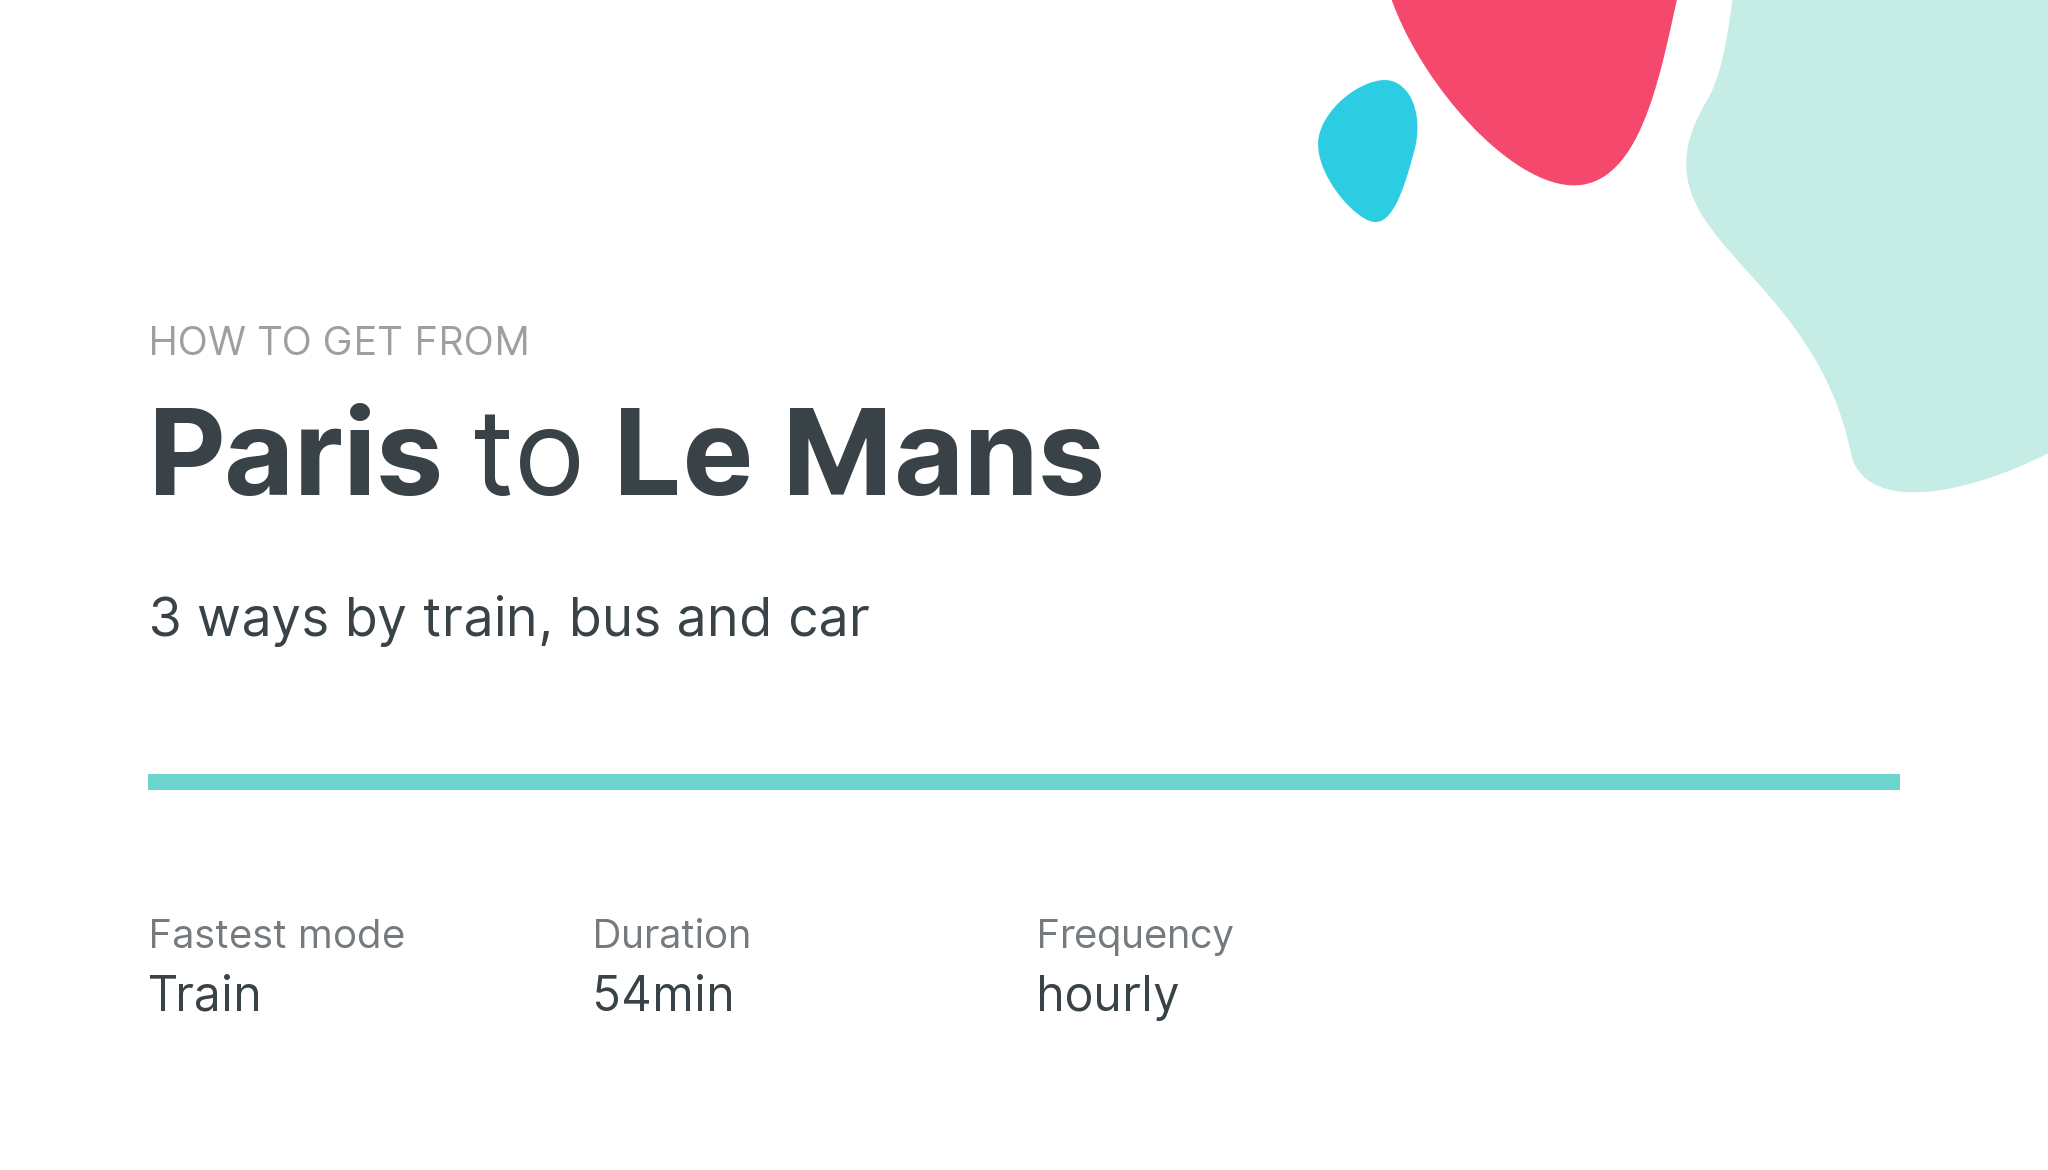 How do I get from Paris to Le Mans